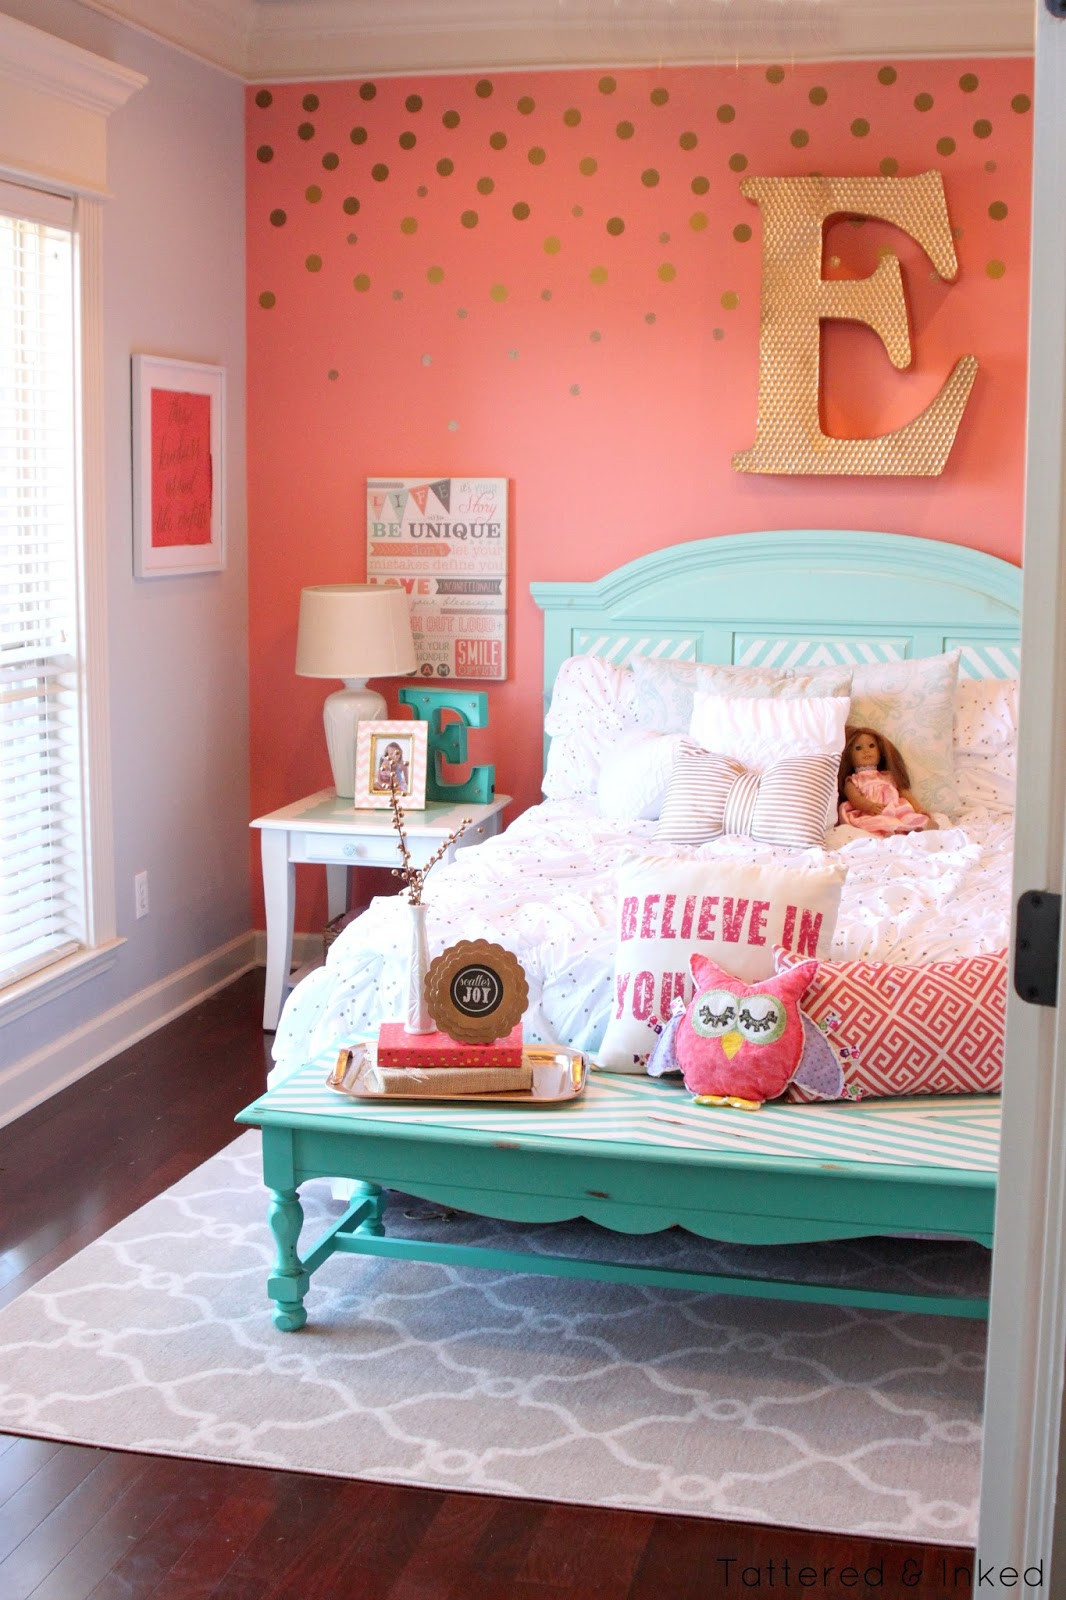 Little Girl Bedroom Paint Ideas
 Tattered and Inked Coral & Aqua Girl s Room Makeover